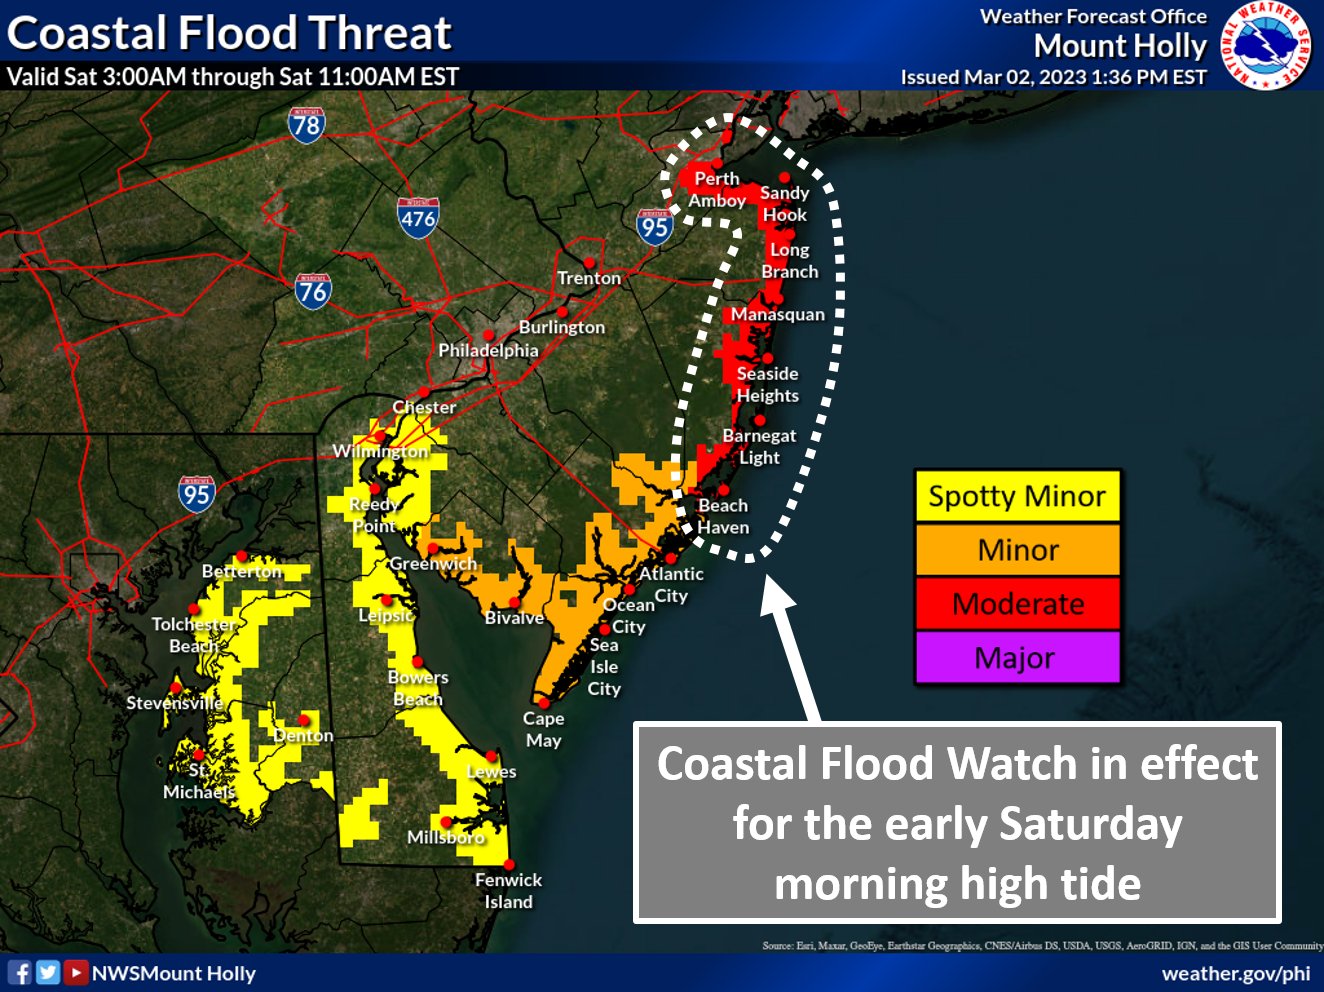 The National Weather Service is warning of expected moderate coastal flooding late Friday into early Saturday for portions of the Jersey Shore.  Image: NWS